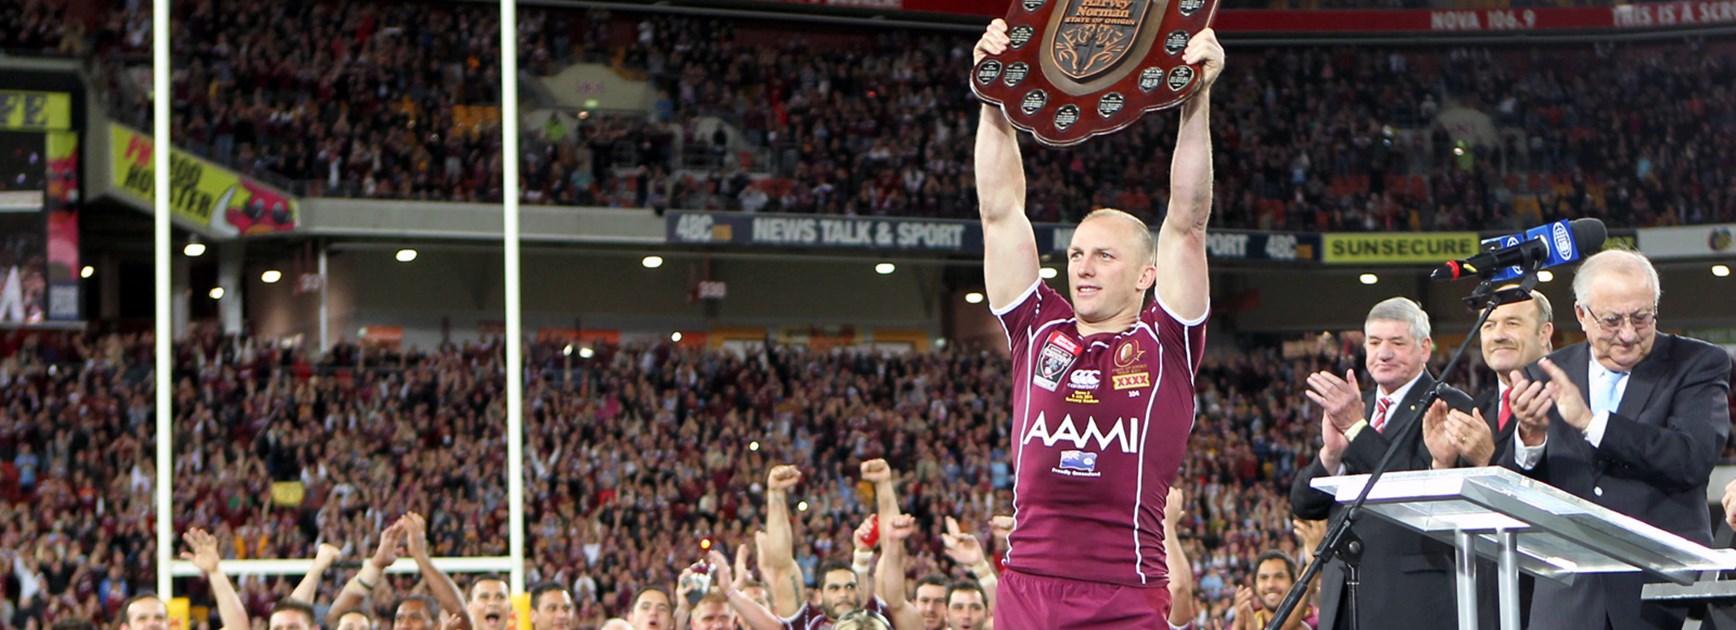 Maroons legend Darren Lockyer has been crowned the champion of NRL.com's Origin Knockout tournament.